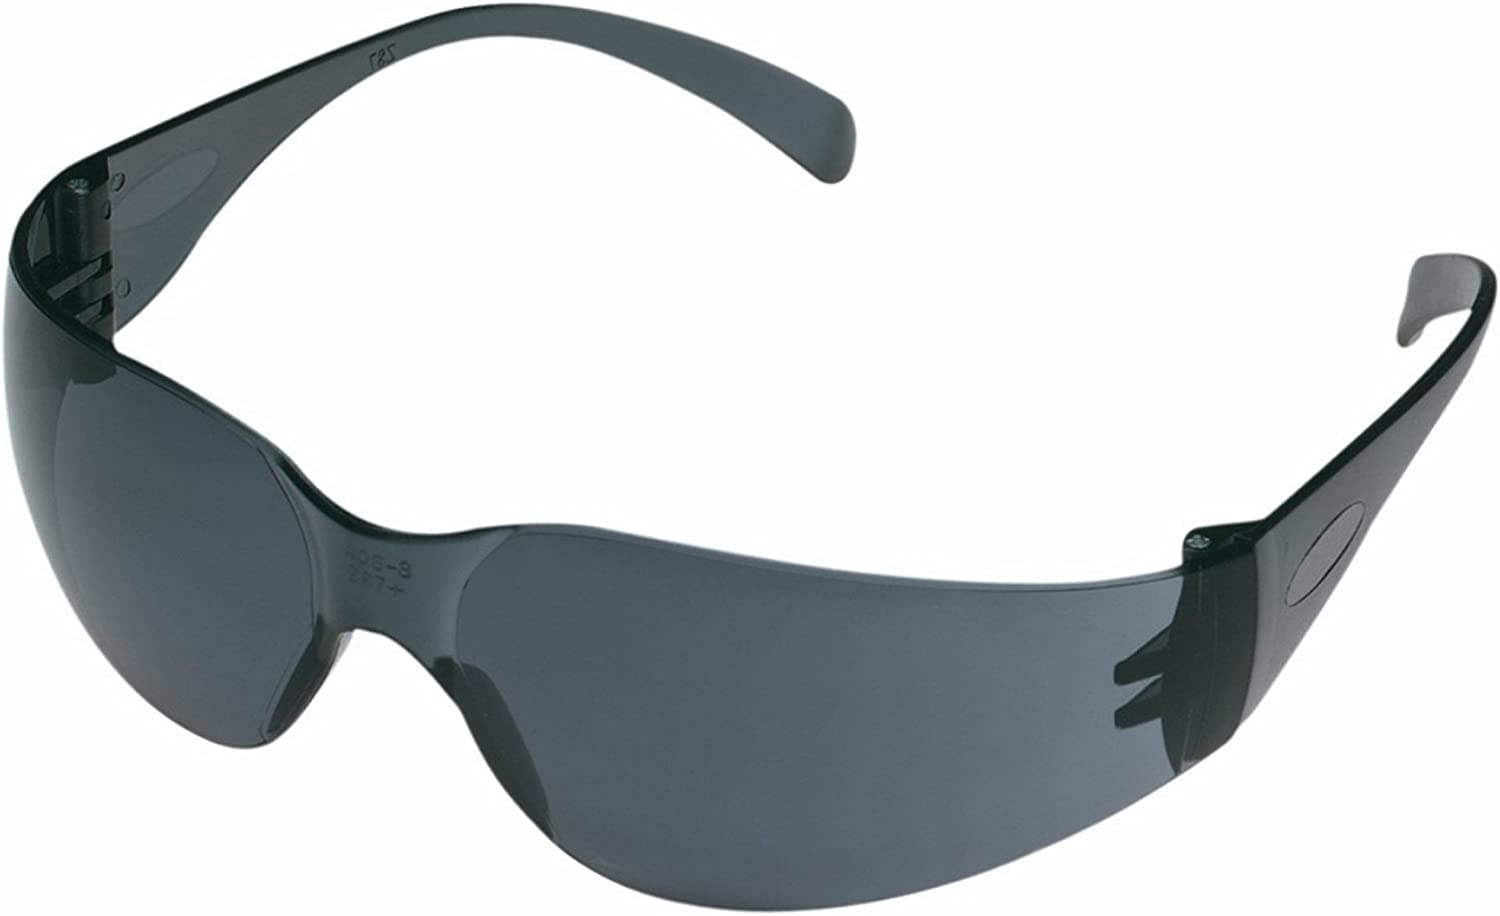 3M Outdoor Safety Eyewear Gray Frame Gray Scratch Resistant Lens